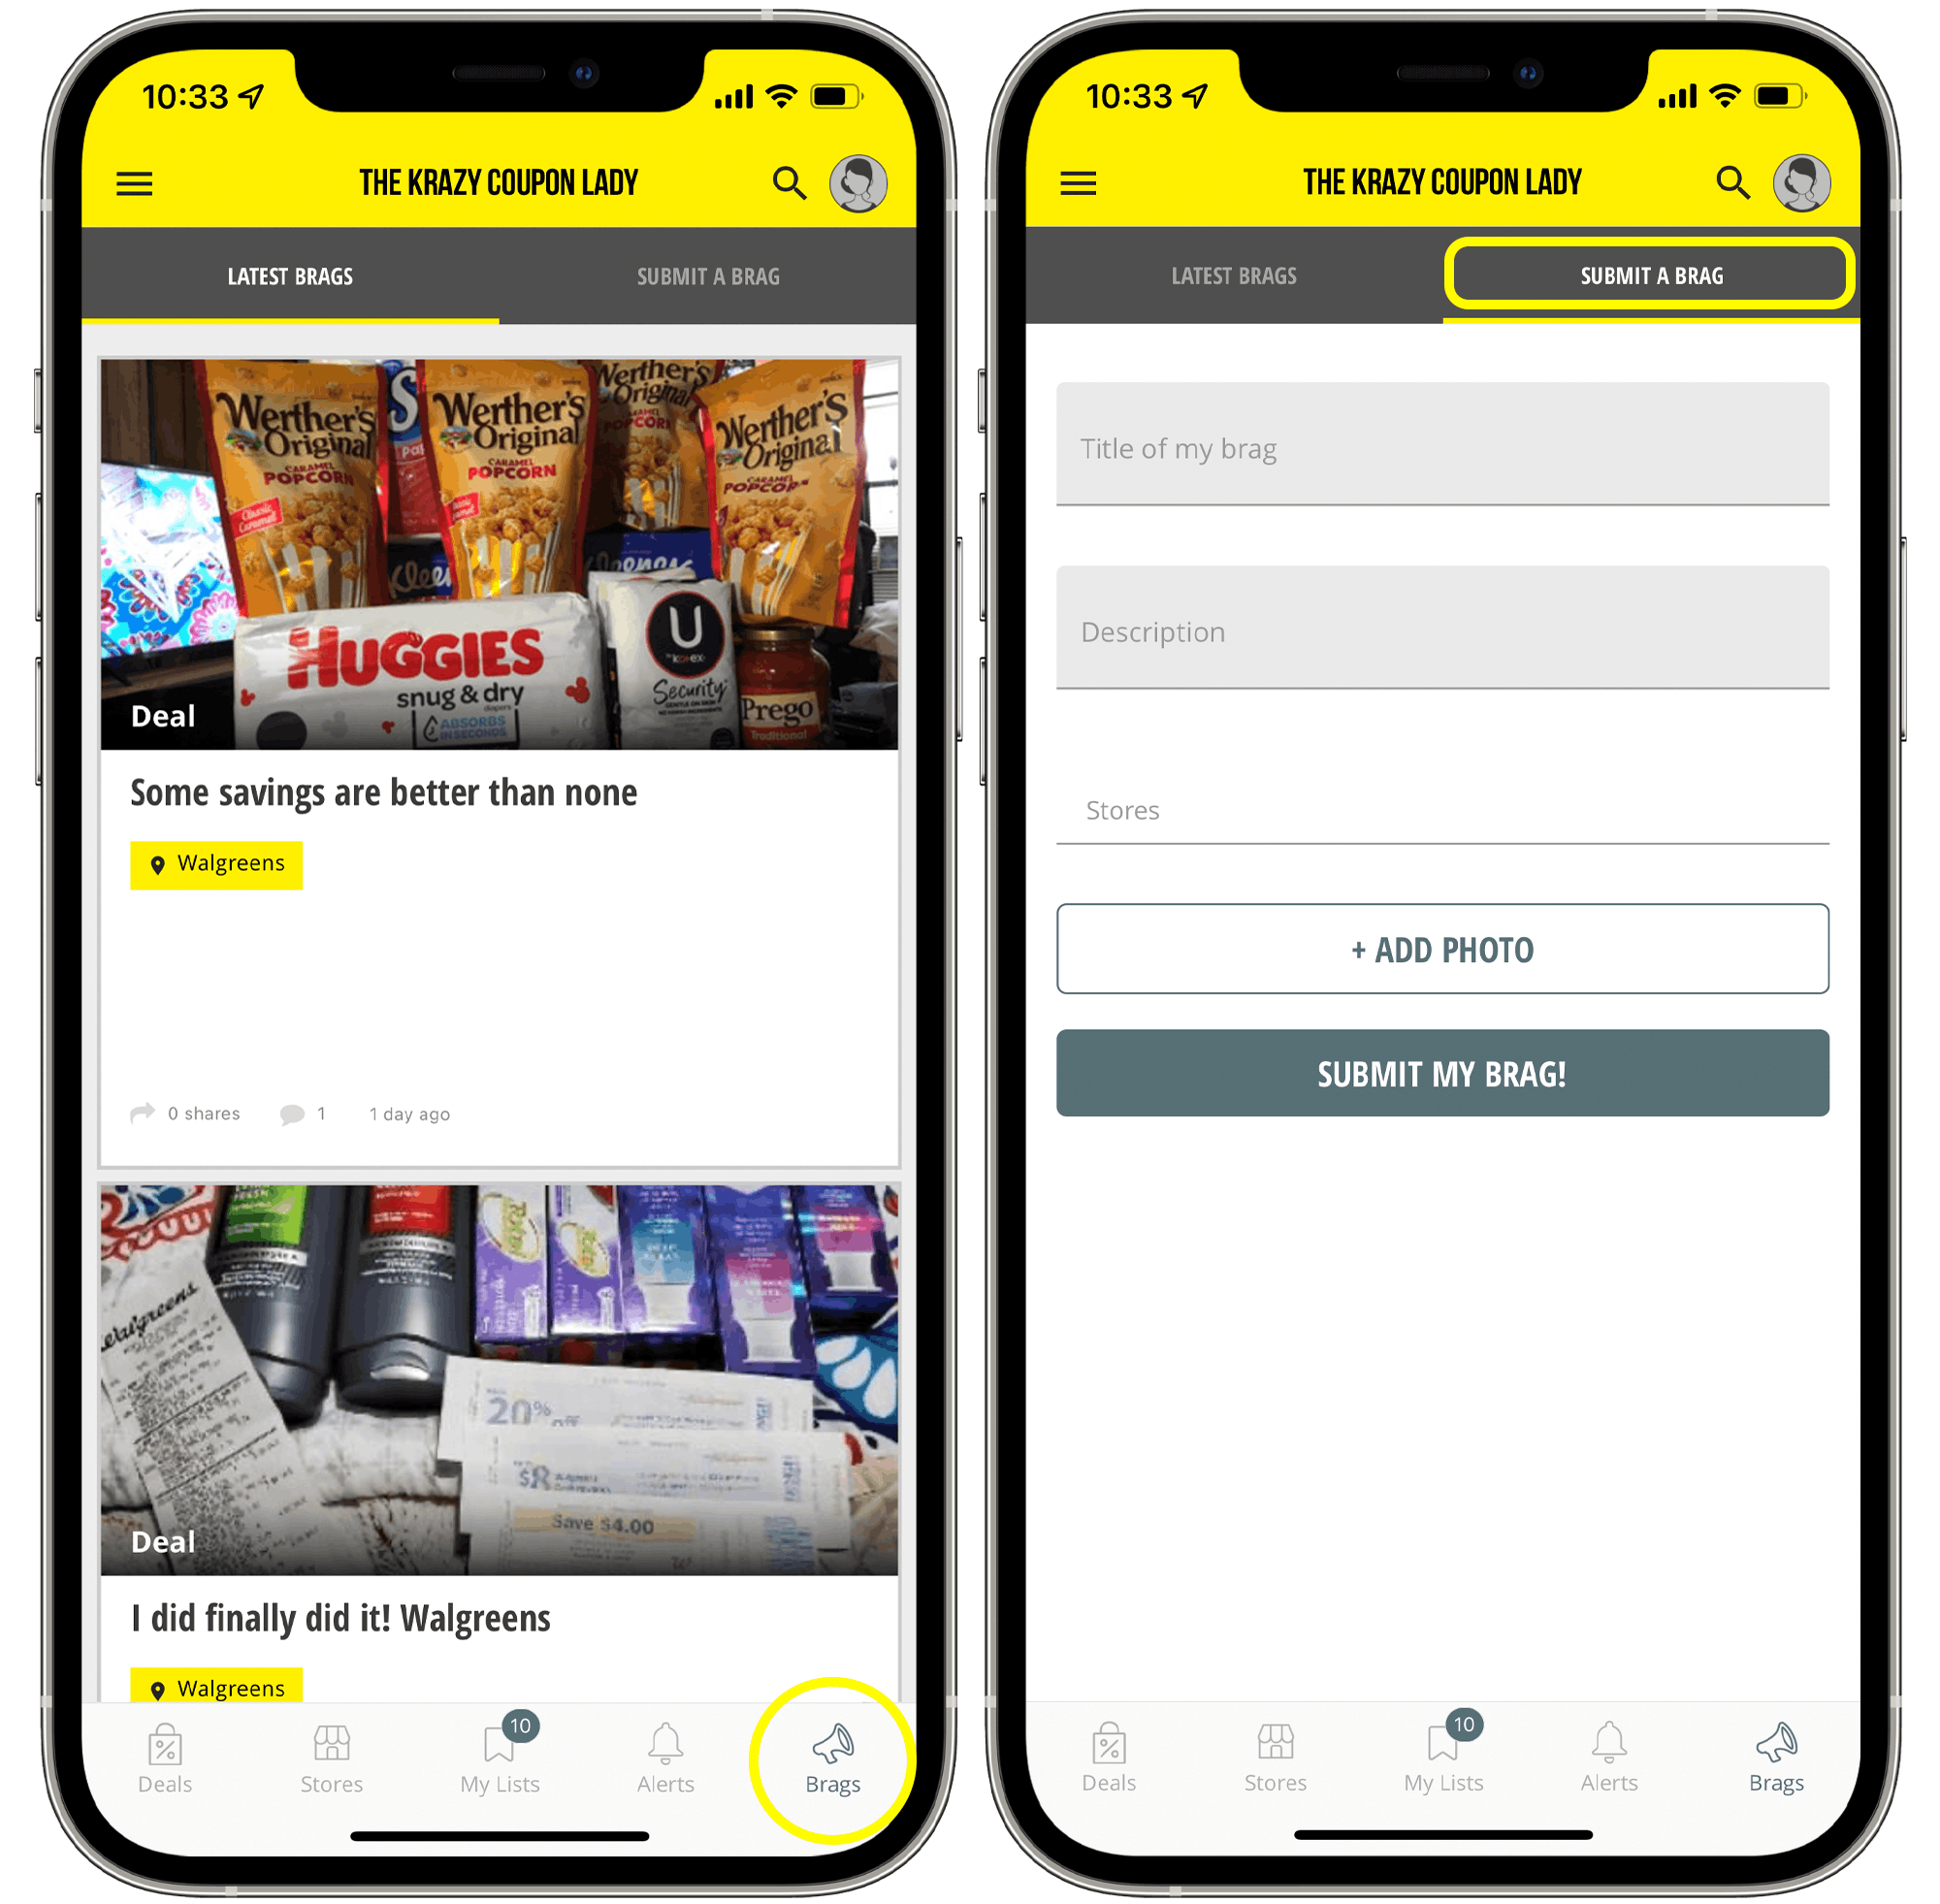 how-to-find-deals-using-the-krazy-coupon-lady-app